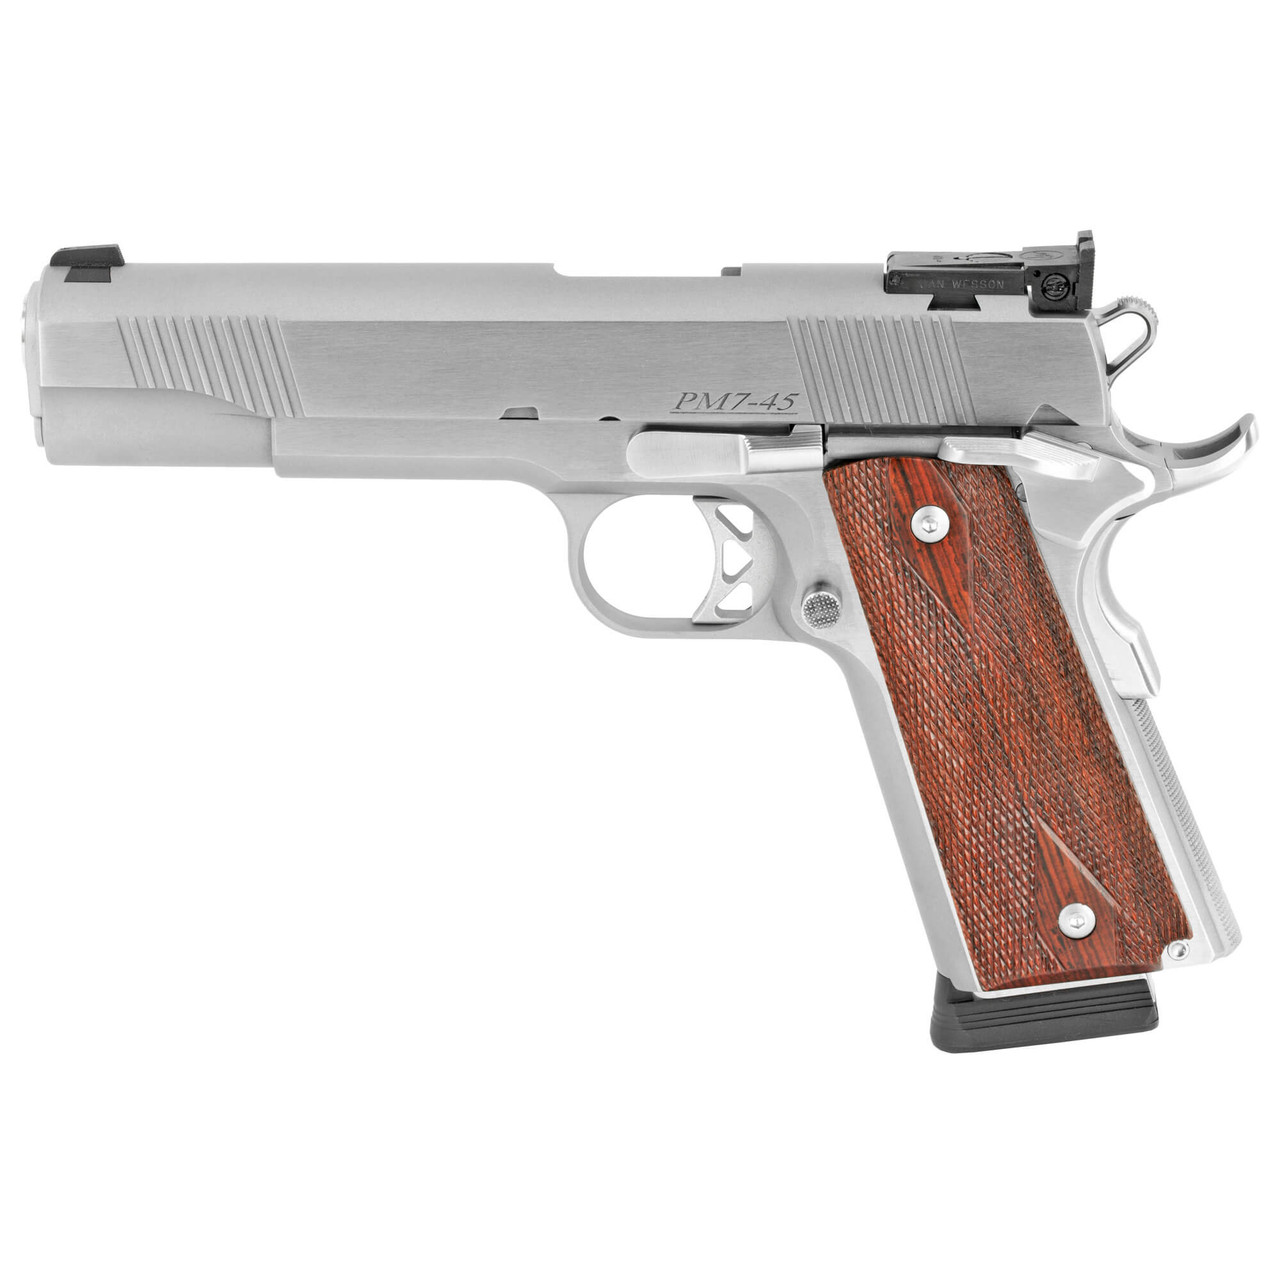 Dan Wesson PM-7 in .45 ACP Stainless Steel Left Side